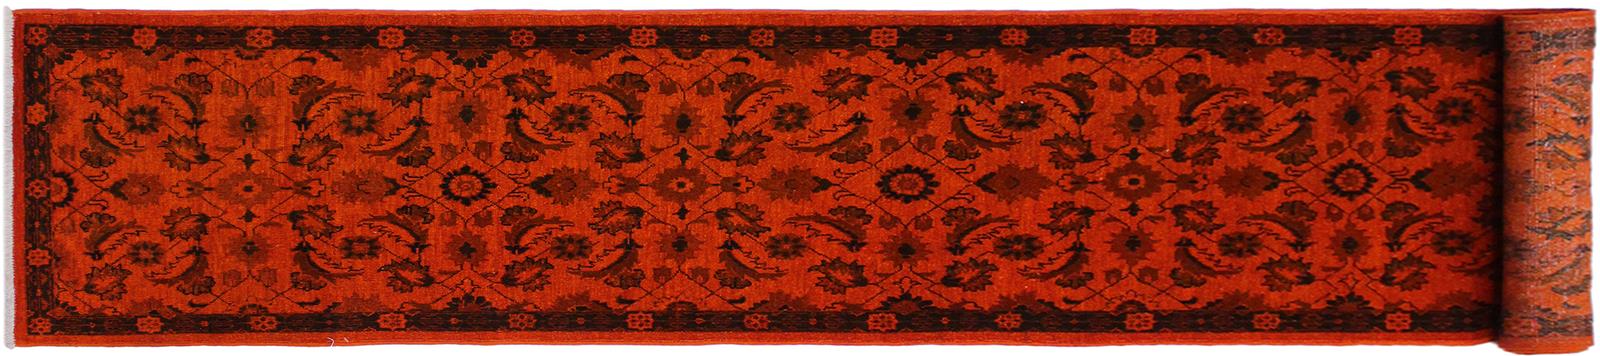 handmade Over Dyed Over Dyed Orange Black Hand Knotted RUNNER 100% WOOL area rug 3x12